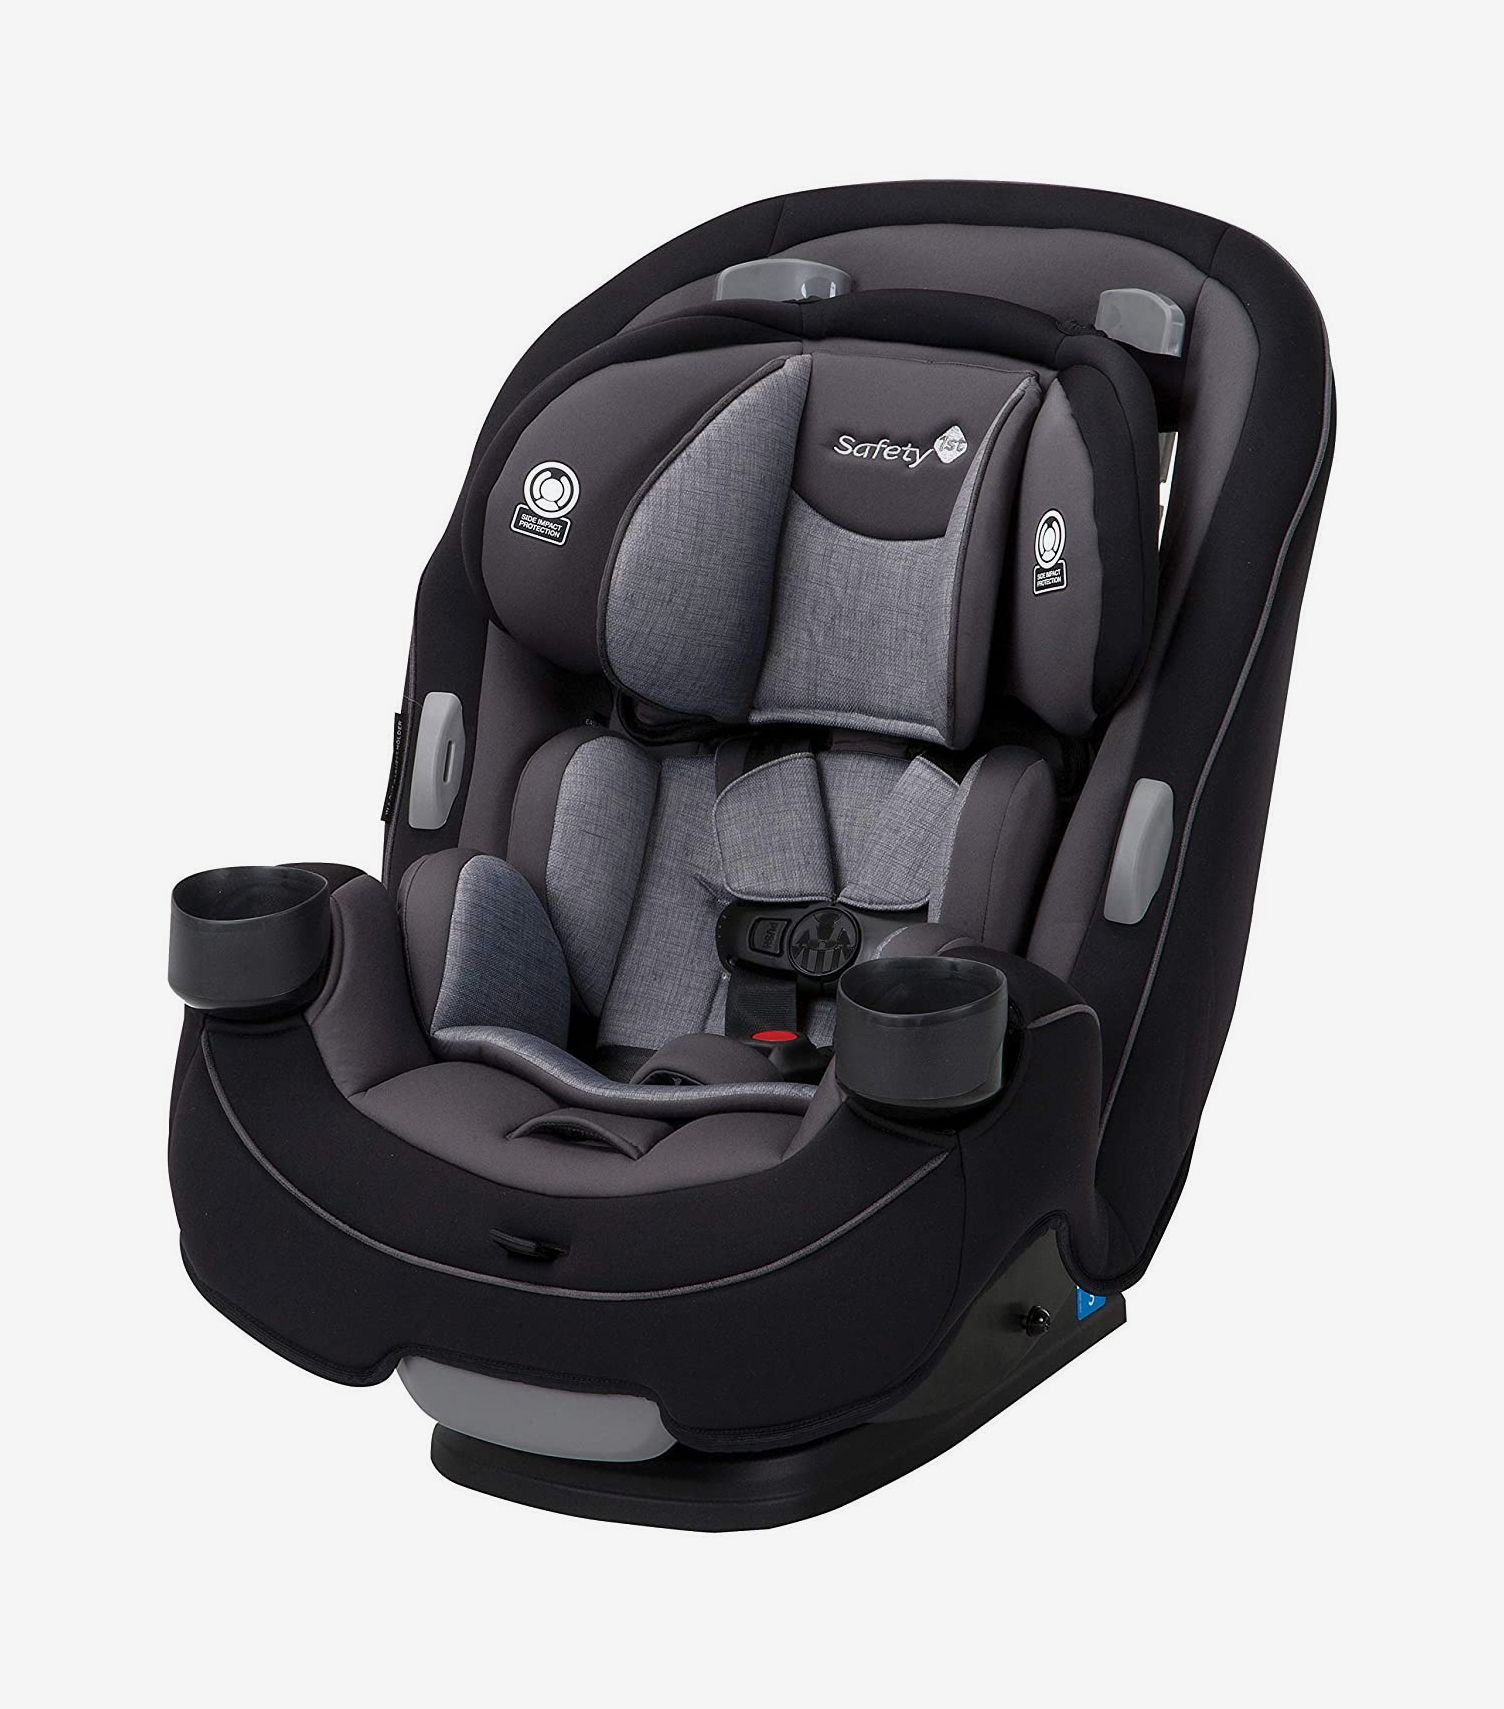 25 Best Infant Car Seats And Booster 2020 The Strategist - Top Rated Baby Car Seats 2020